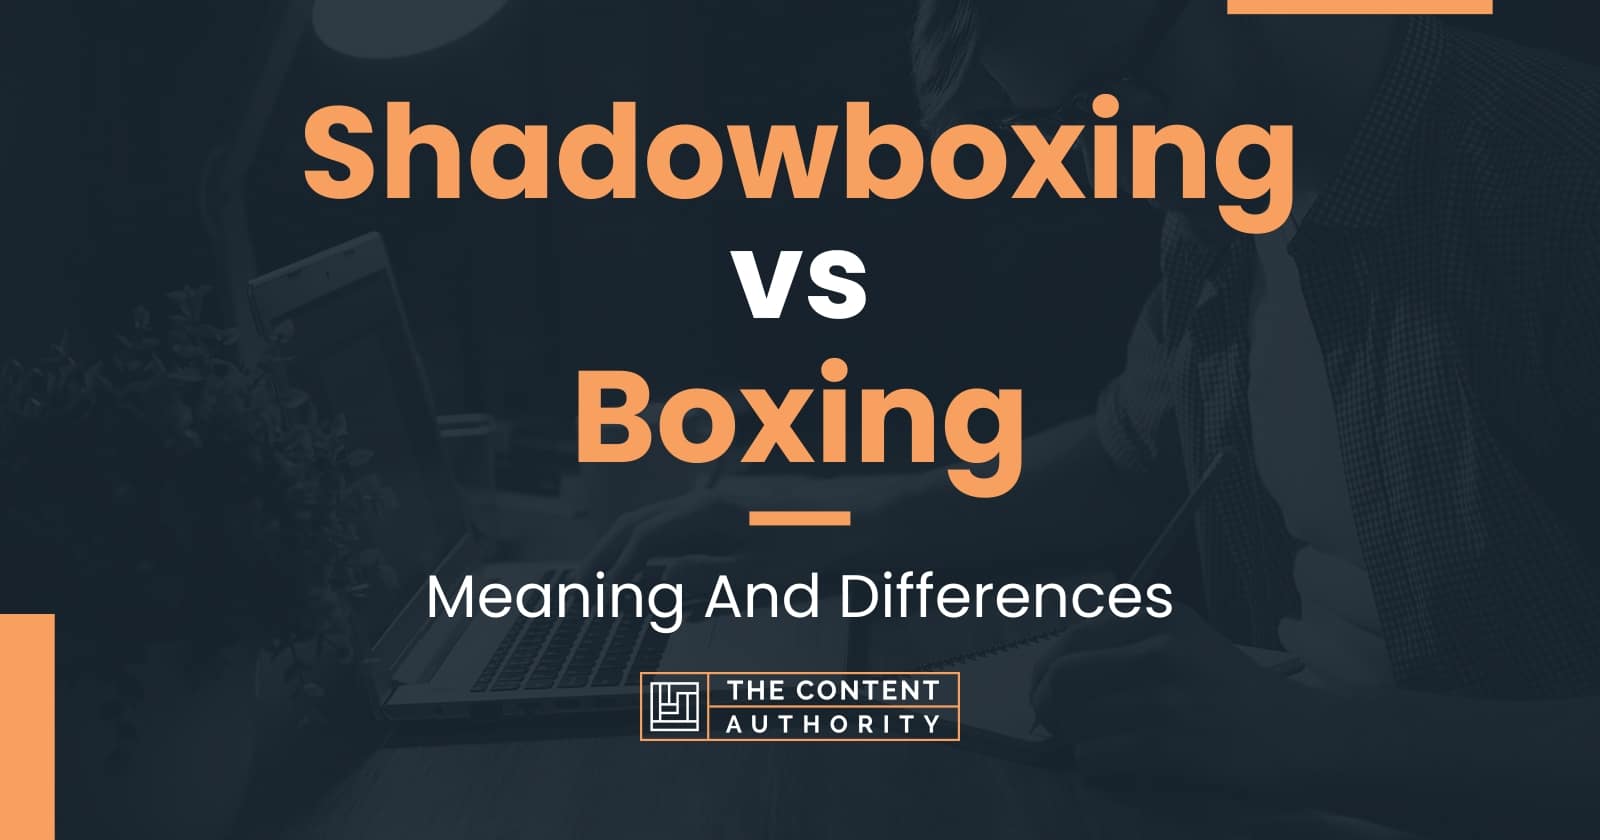 Shadowboxing vs Boxing: Meaning And Differences